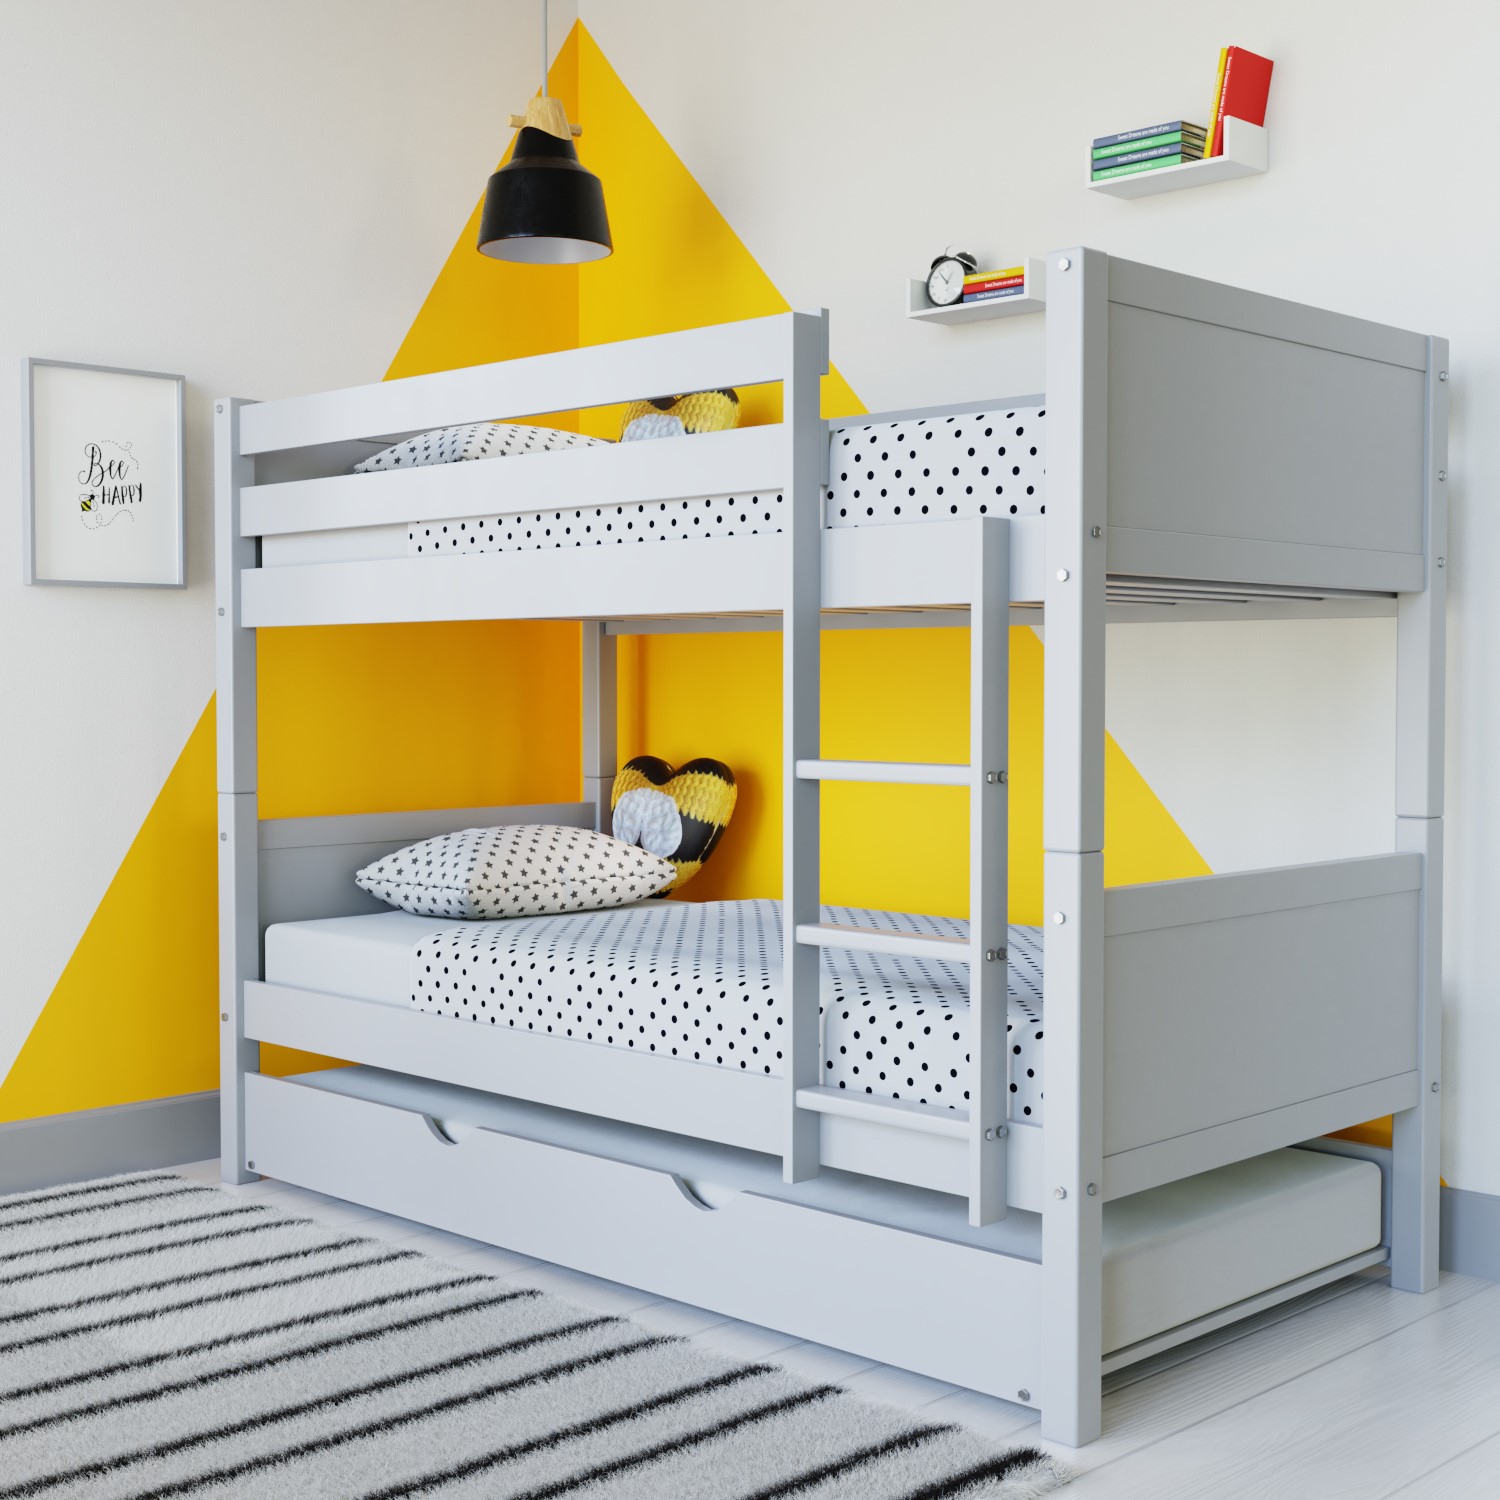 Light Grey Wooden Bunk Bed With Trundle, Yellow Bunk Bed